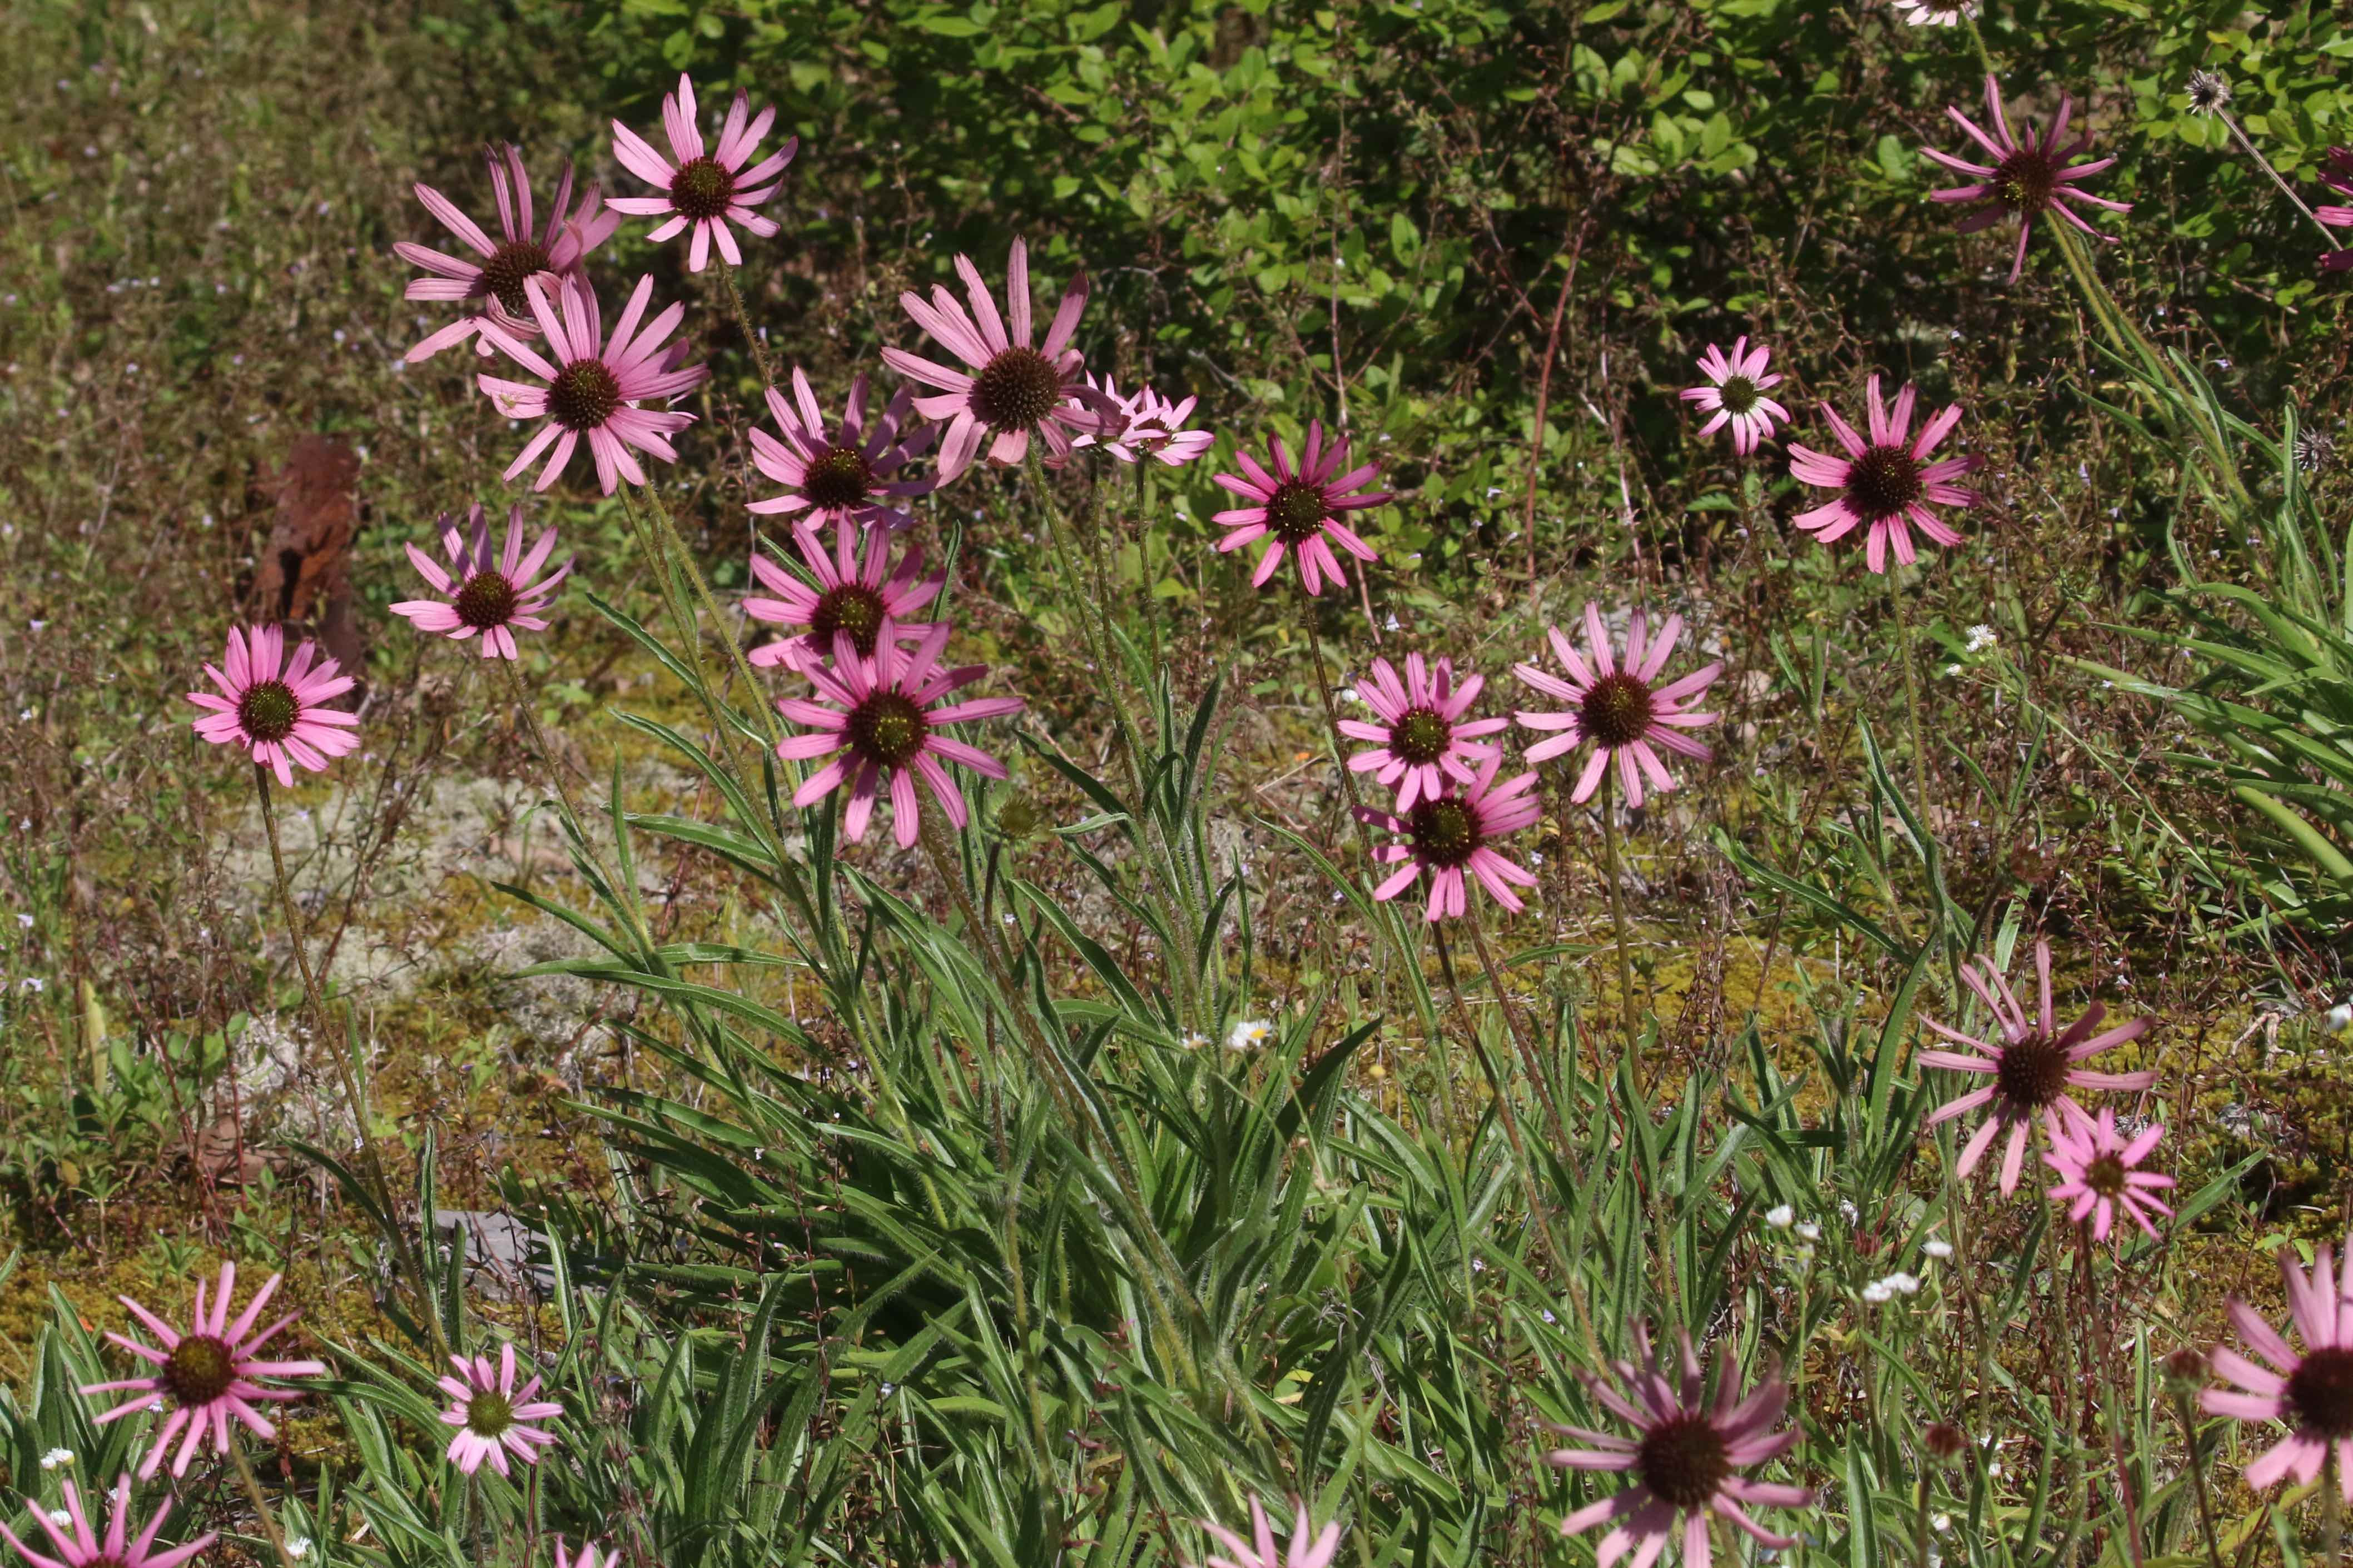 The Scientific Name is Echinacea tennesseensis. You will likely hear them called Tennessee Purple Coneflower. This picture shows the A blossom cluster showing the distinctive narrow leaves covered with hairs. of Echinacea tennesseensis